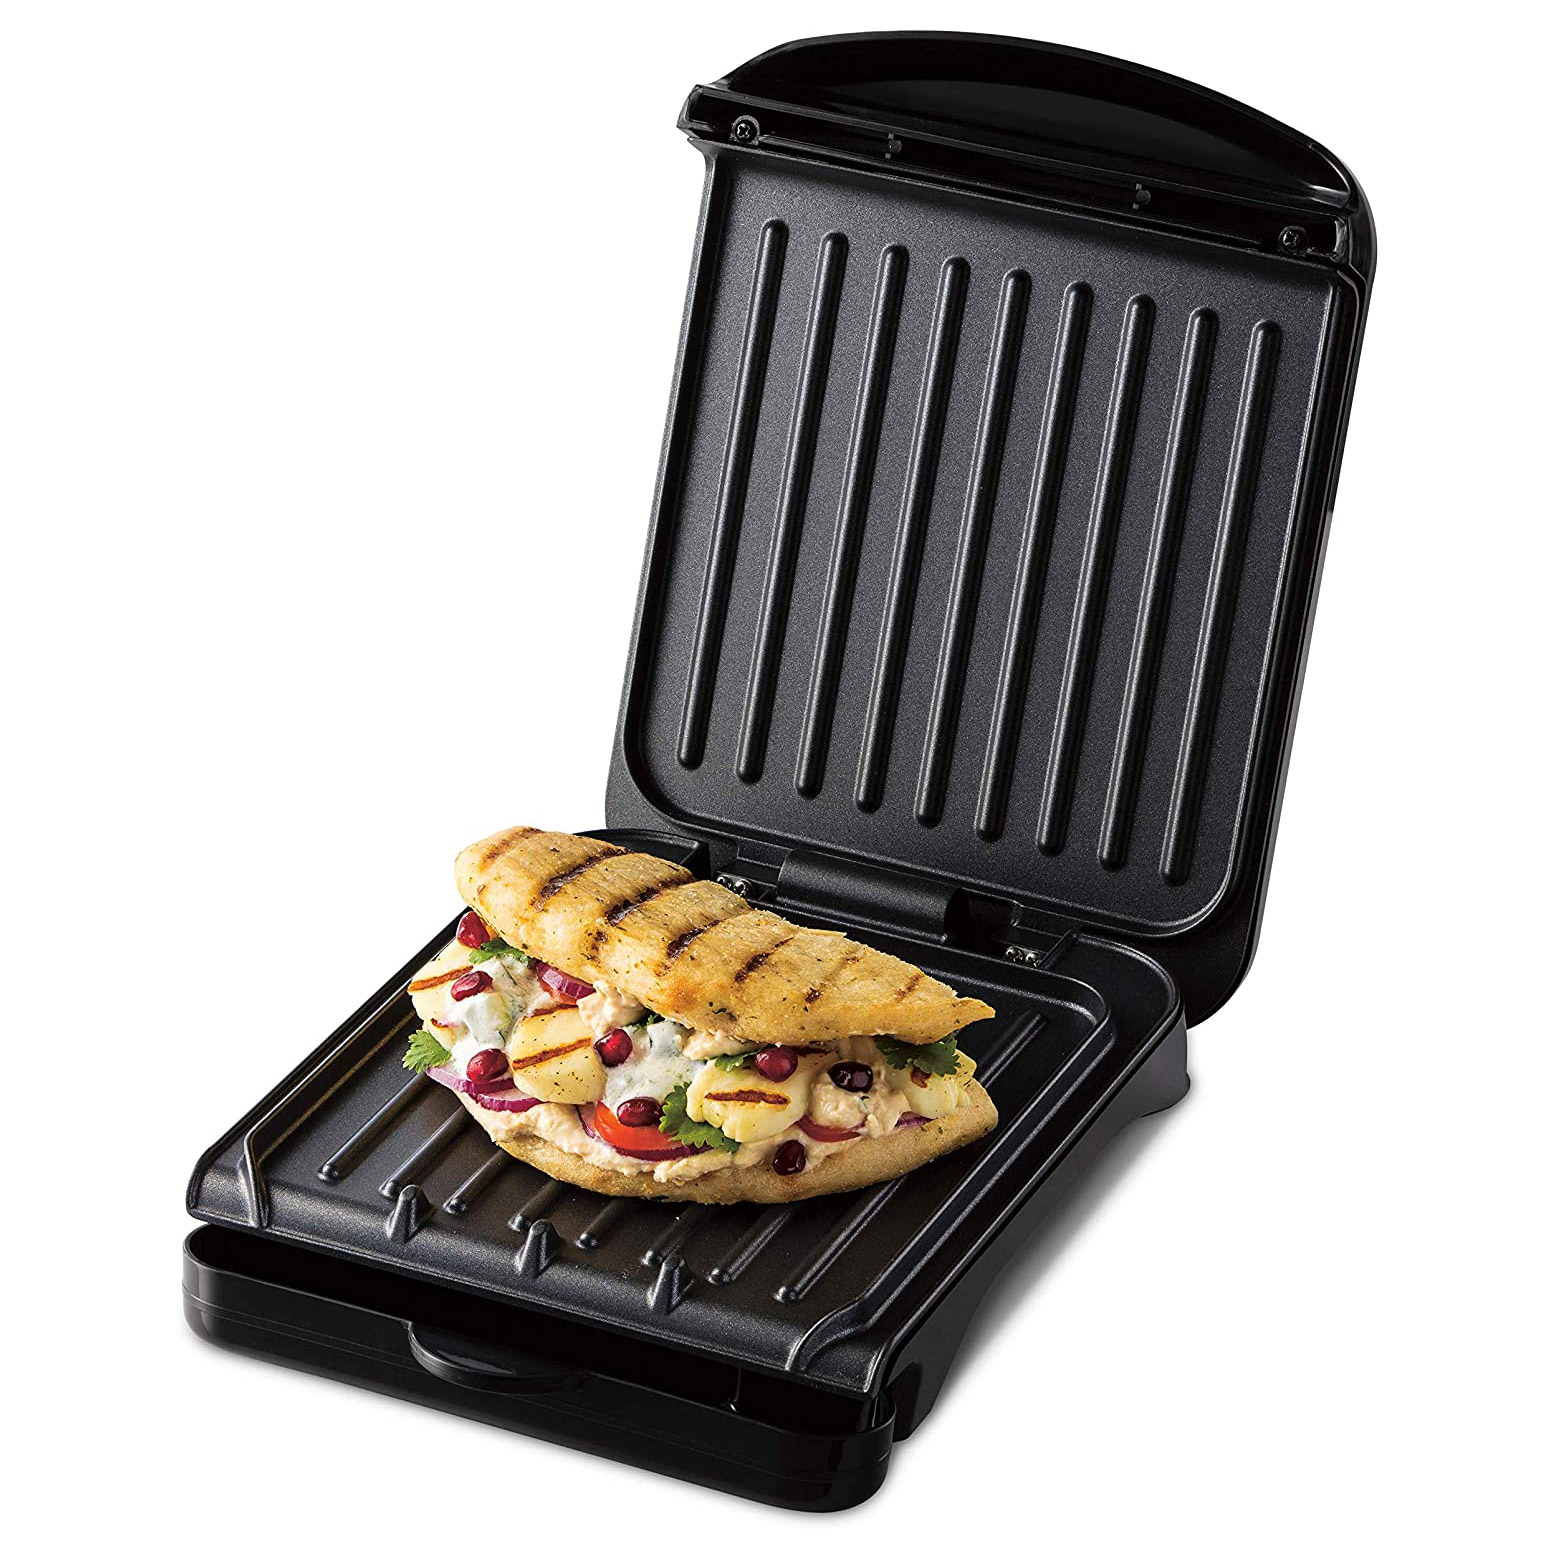 Image of George Foreman 25800 Small Fit Grill in Black